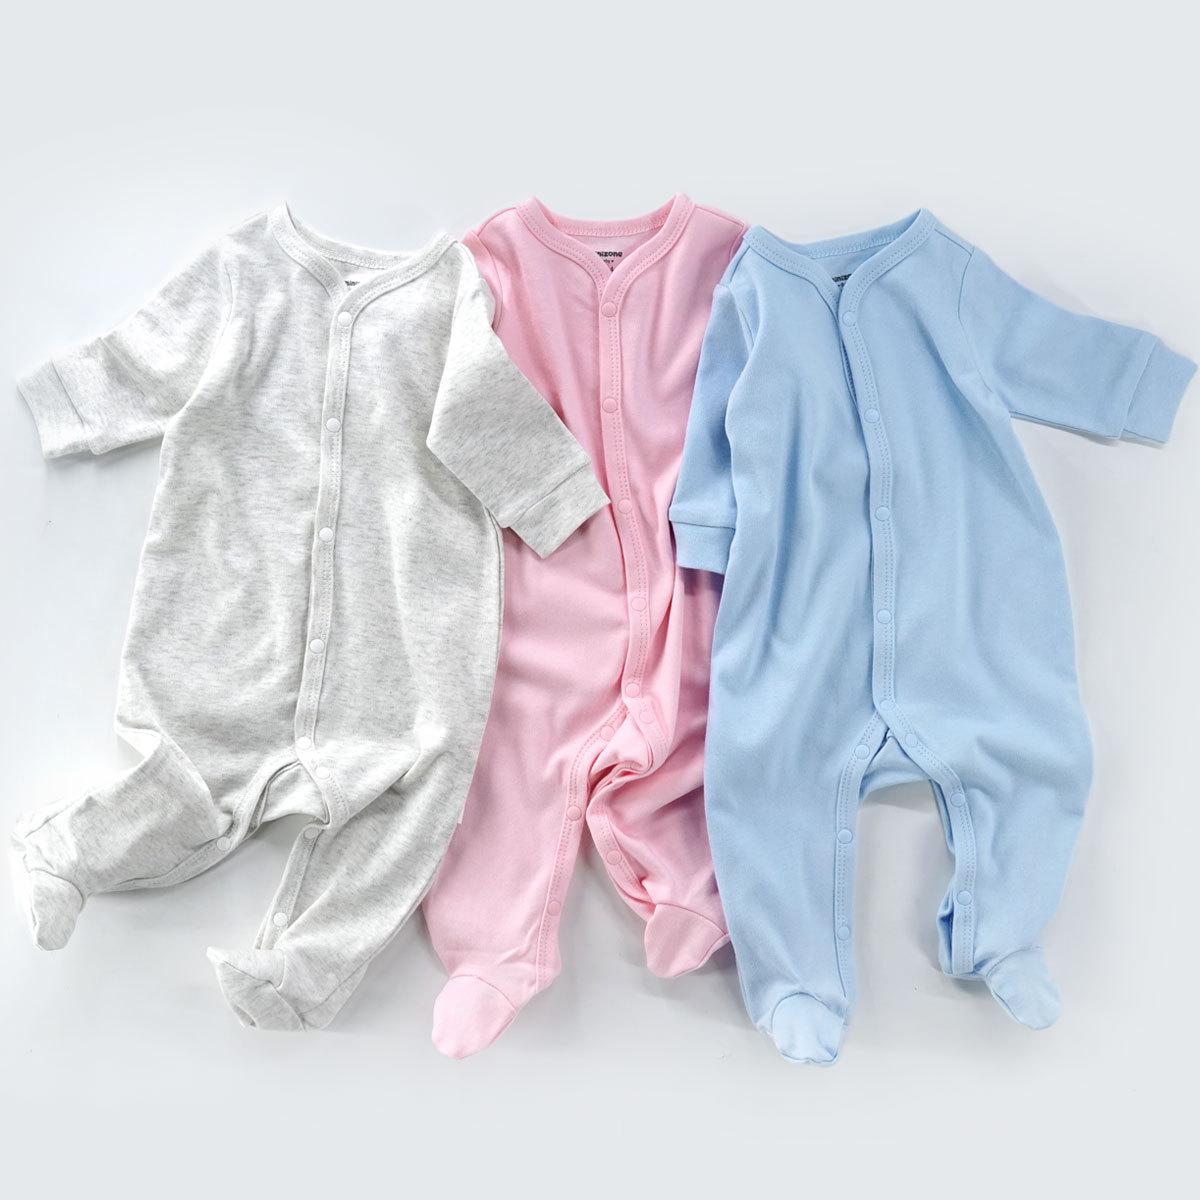 2020 New Fashion Baby Girl Clothes Baby Romper For Newborn Cloting Spring And Autumn Costume Cotton Pure Color O-neck Jumpsuit